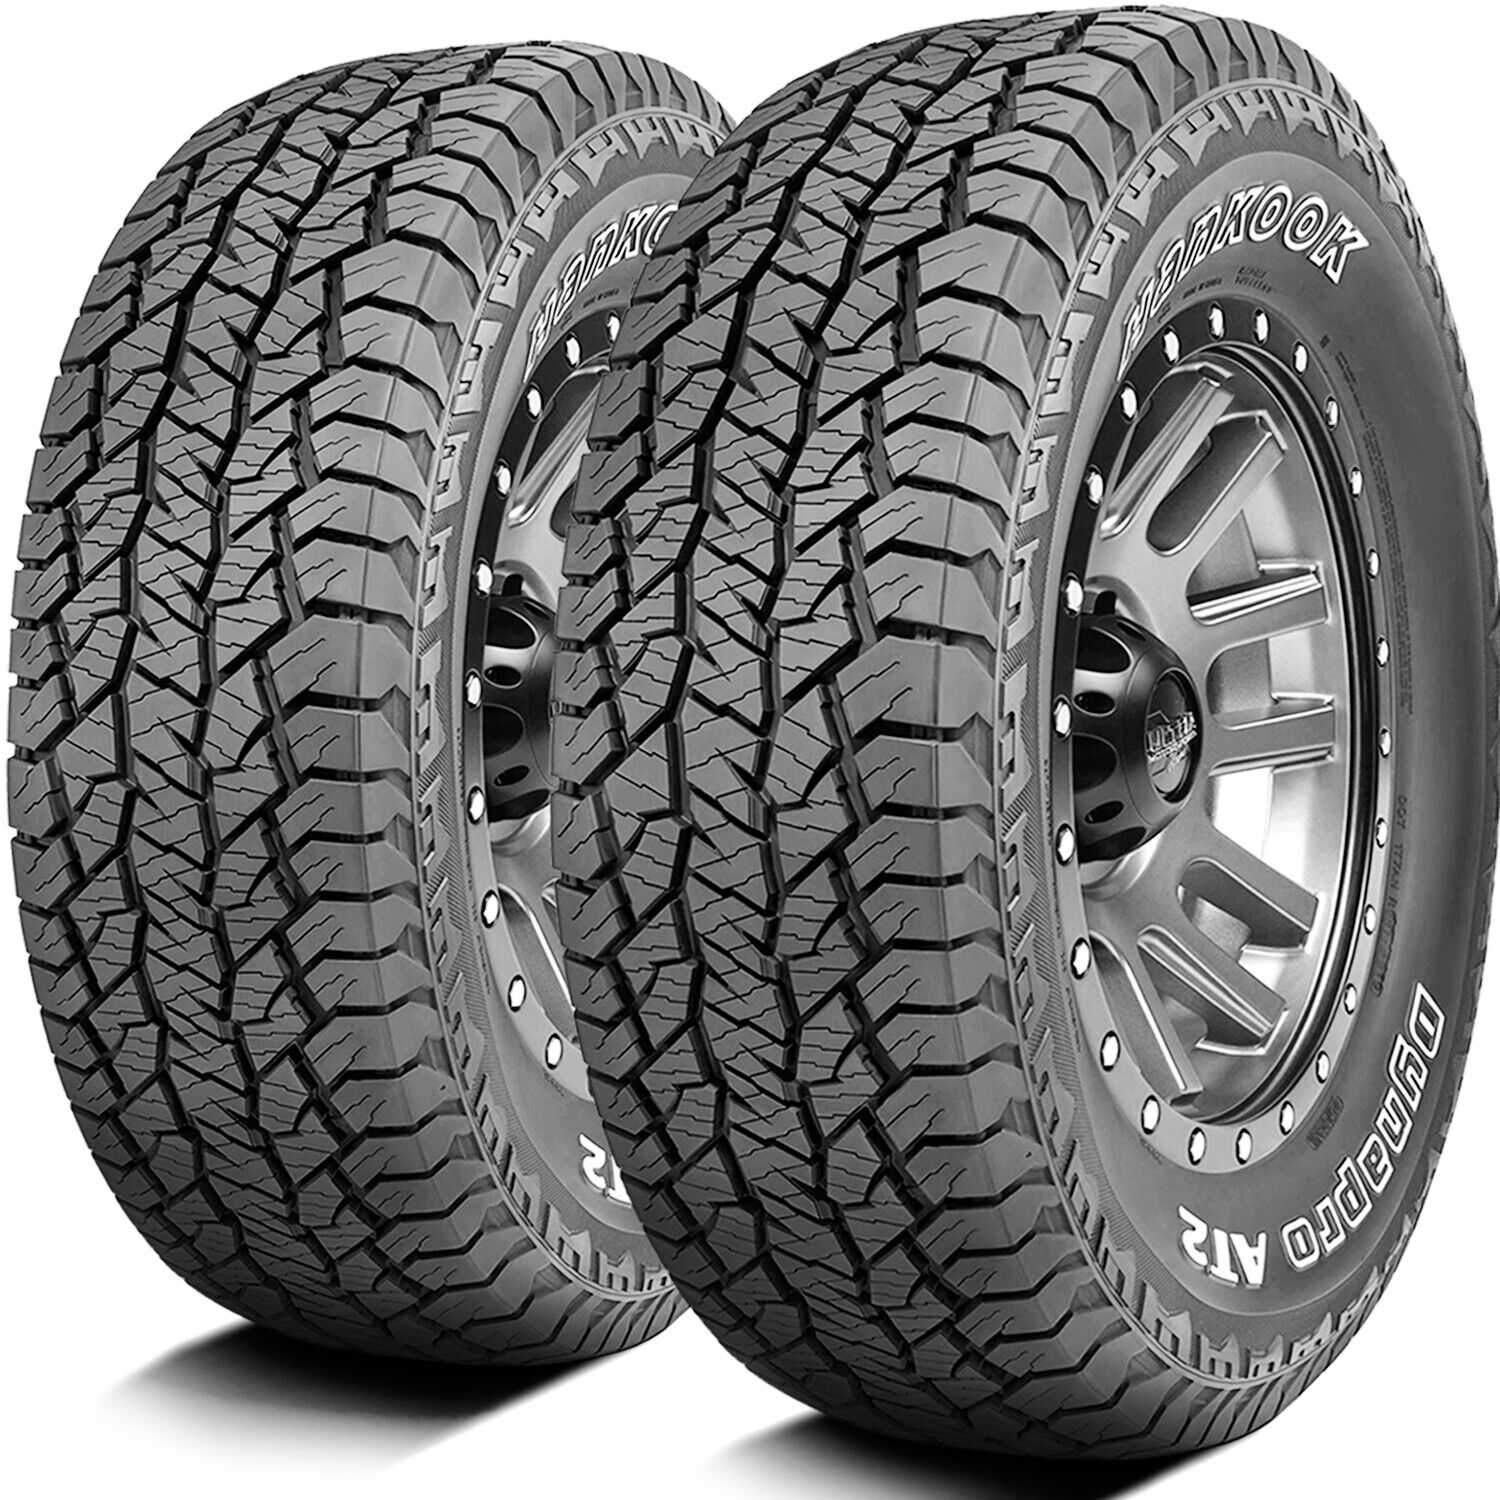 2 Tires Hankook Dynapro AT2 255/65R16 109T A/T All Terrain